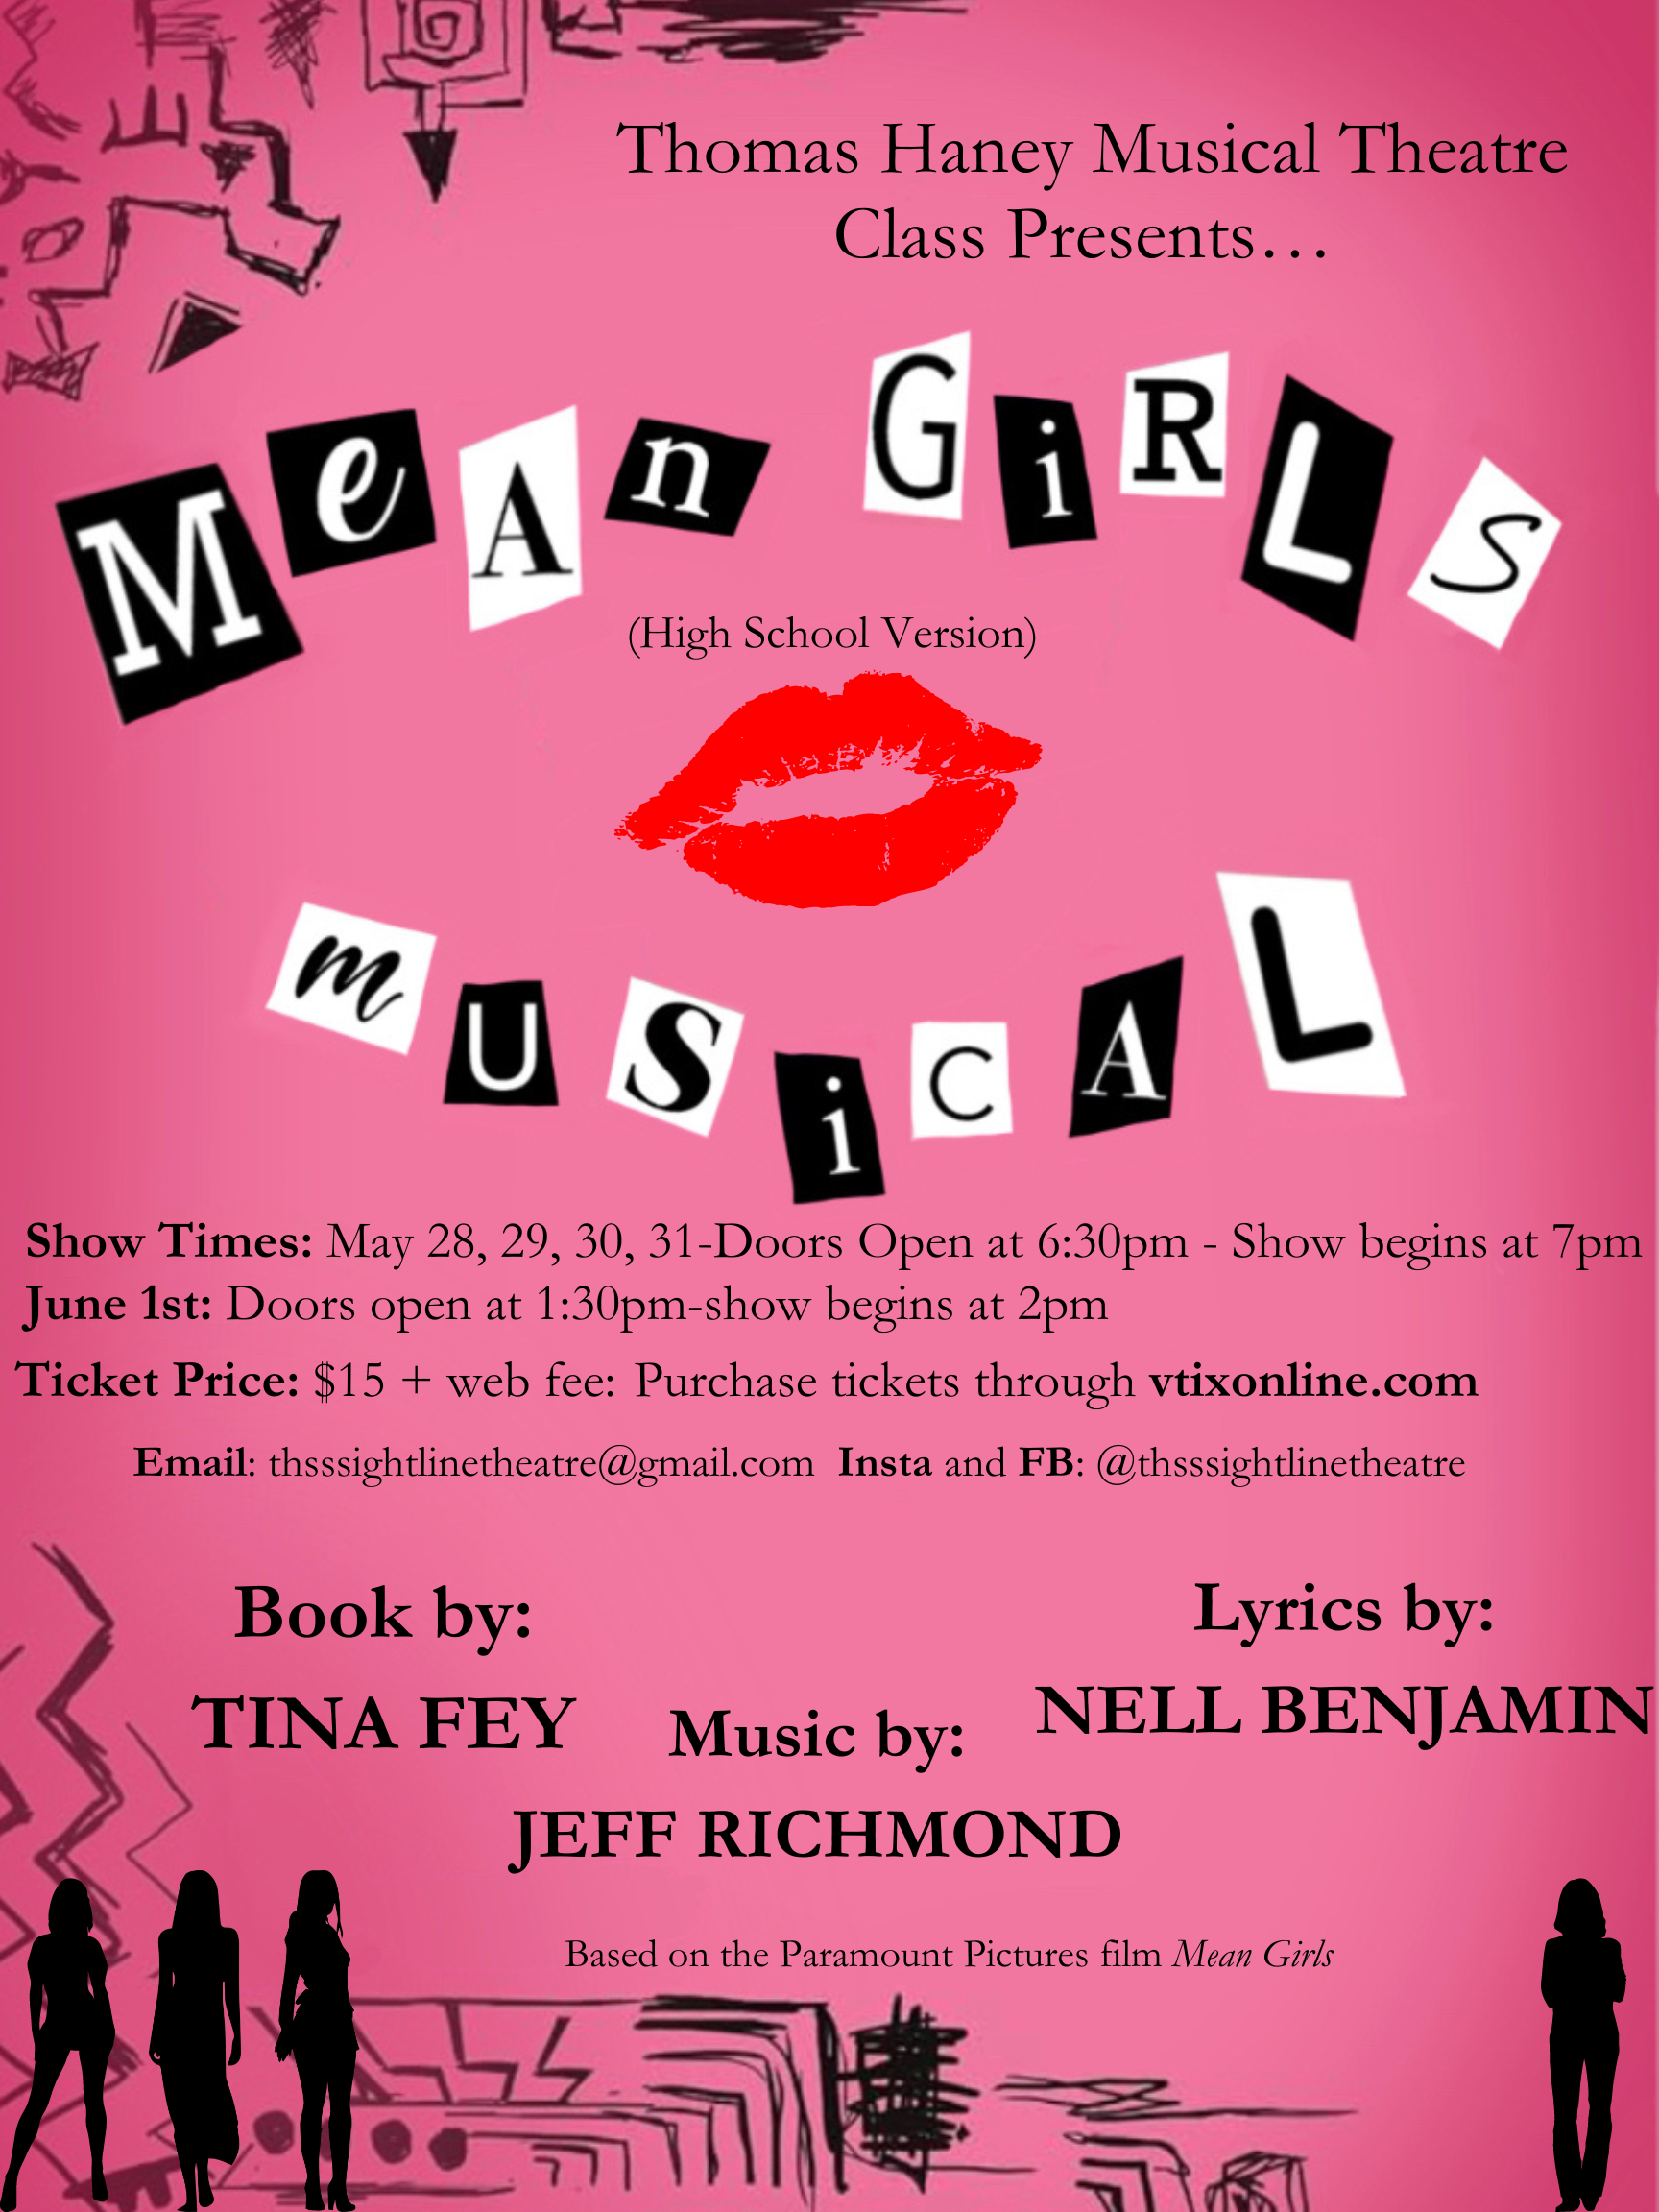 Poster for Thomas Haney Secondary's presentation of "Mean Girls (High School Version)" musical.